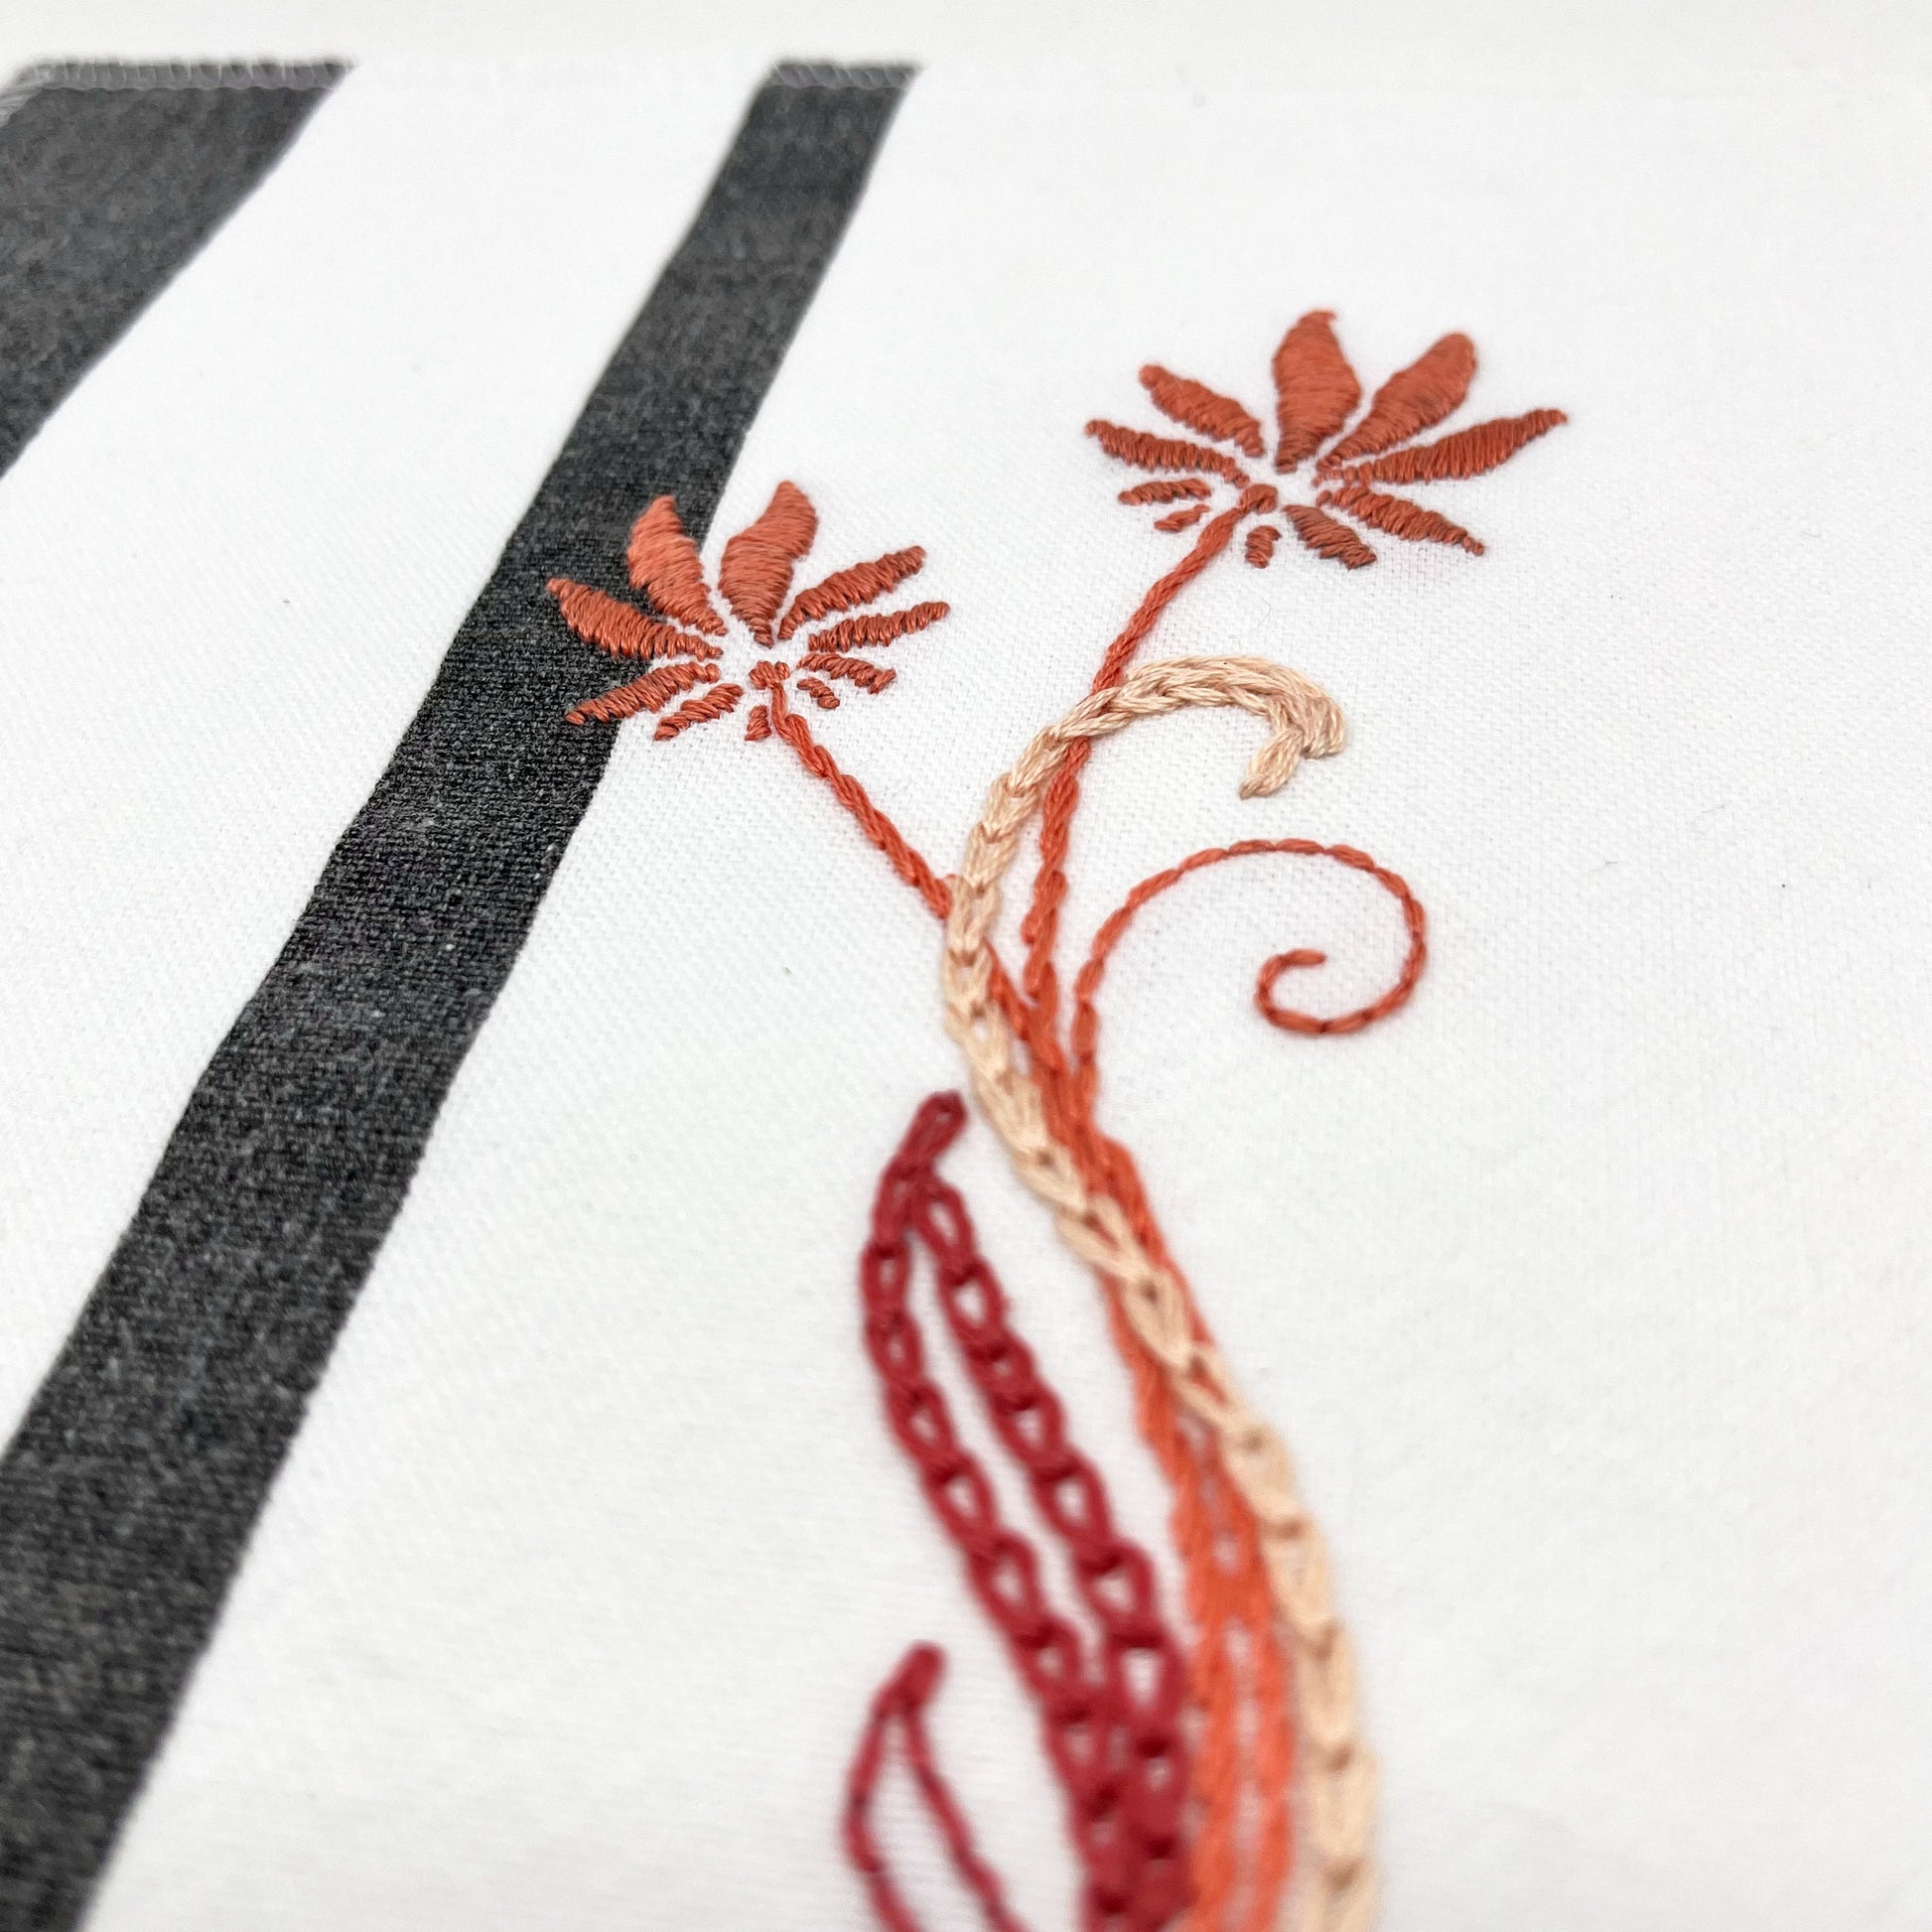 close up angled view of a fabric wall hanging made out of white fabric with black vertical stripes, hand stitched with flowers in shades of coral with long curvy stems in chainstitch, backstitch and stem stitch, on a white background